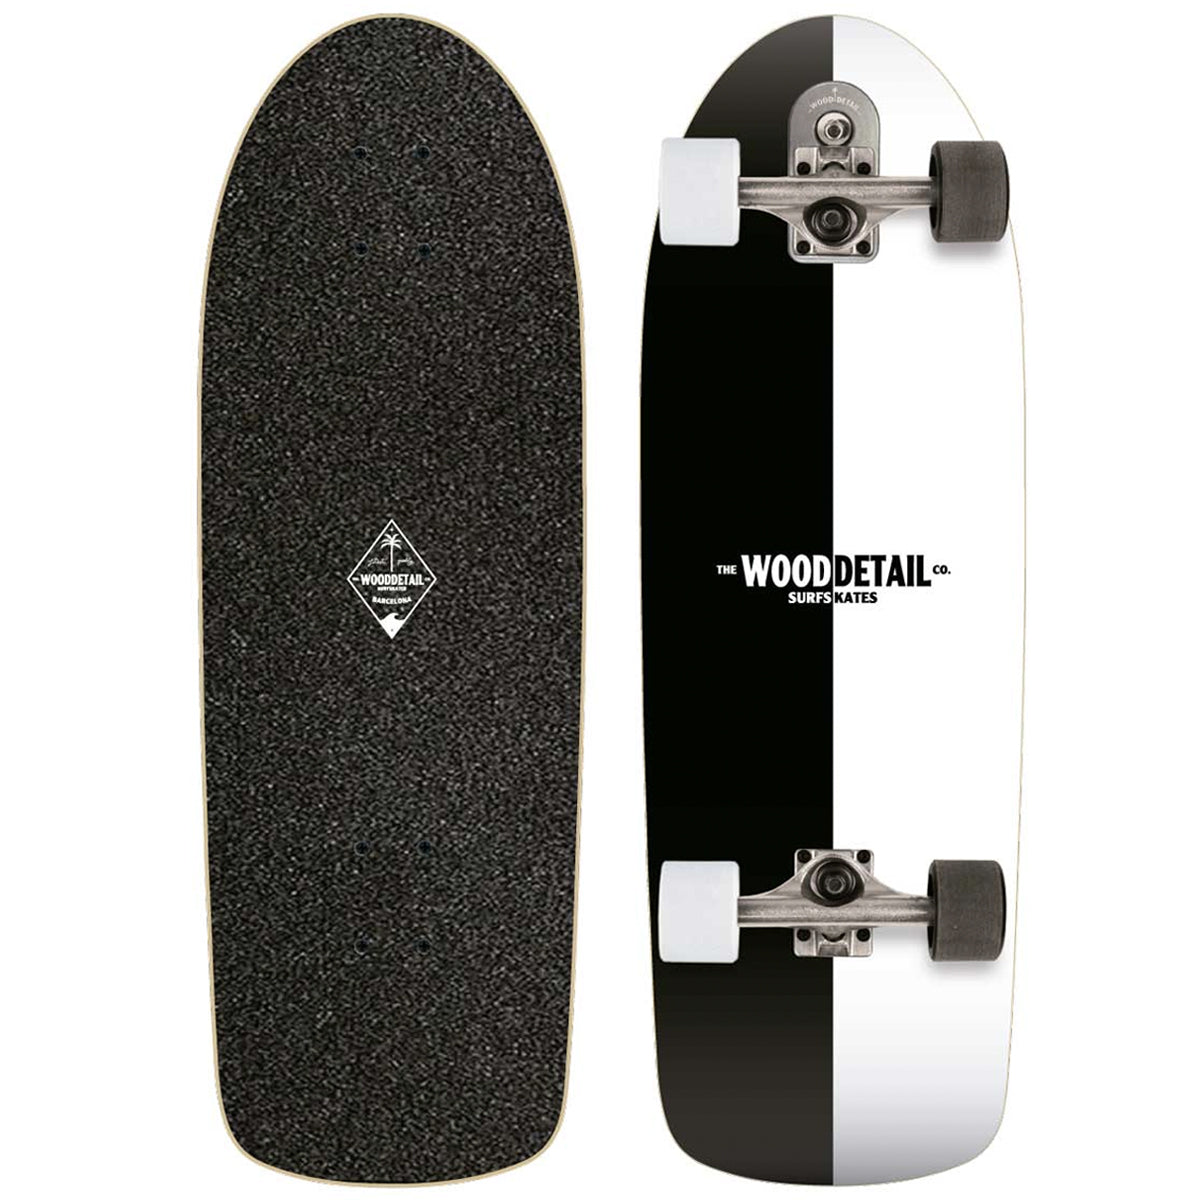 WoodDetail Venice 31" Surfskate 2022 Complete